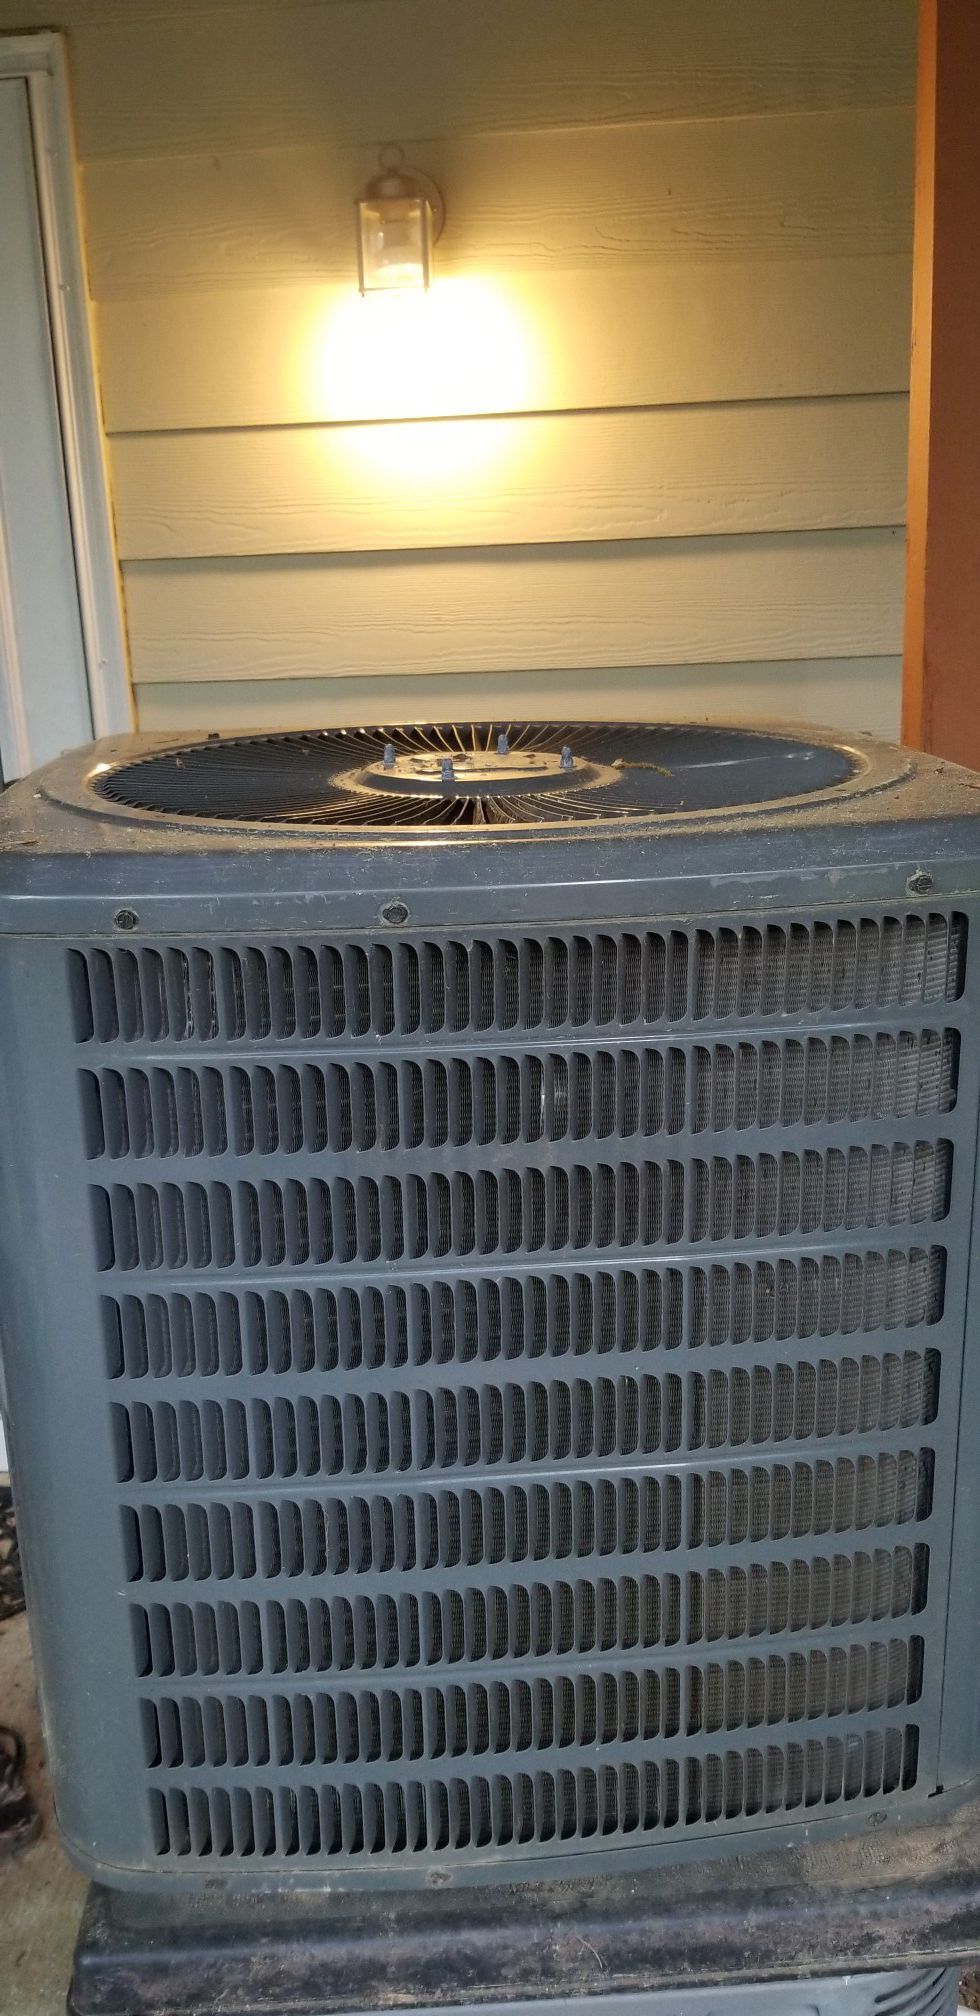 Used ac for sale